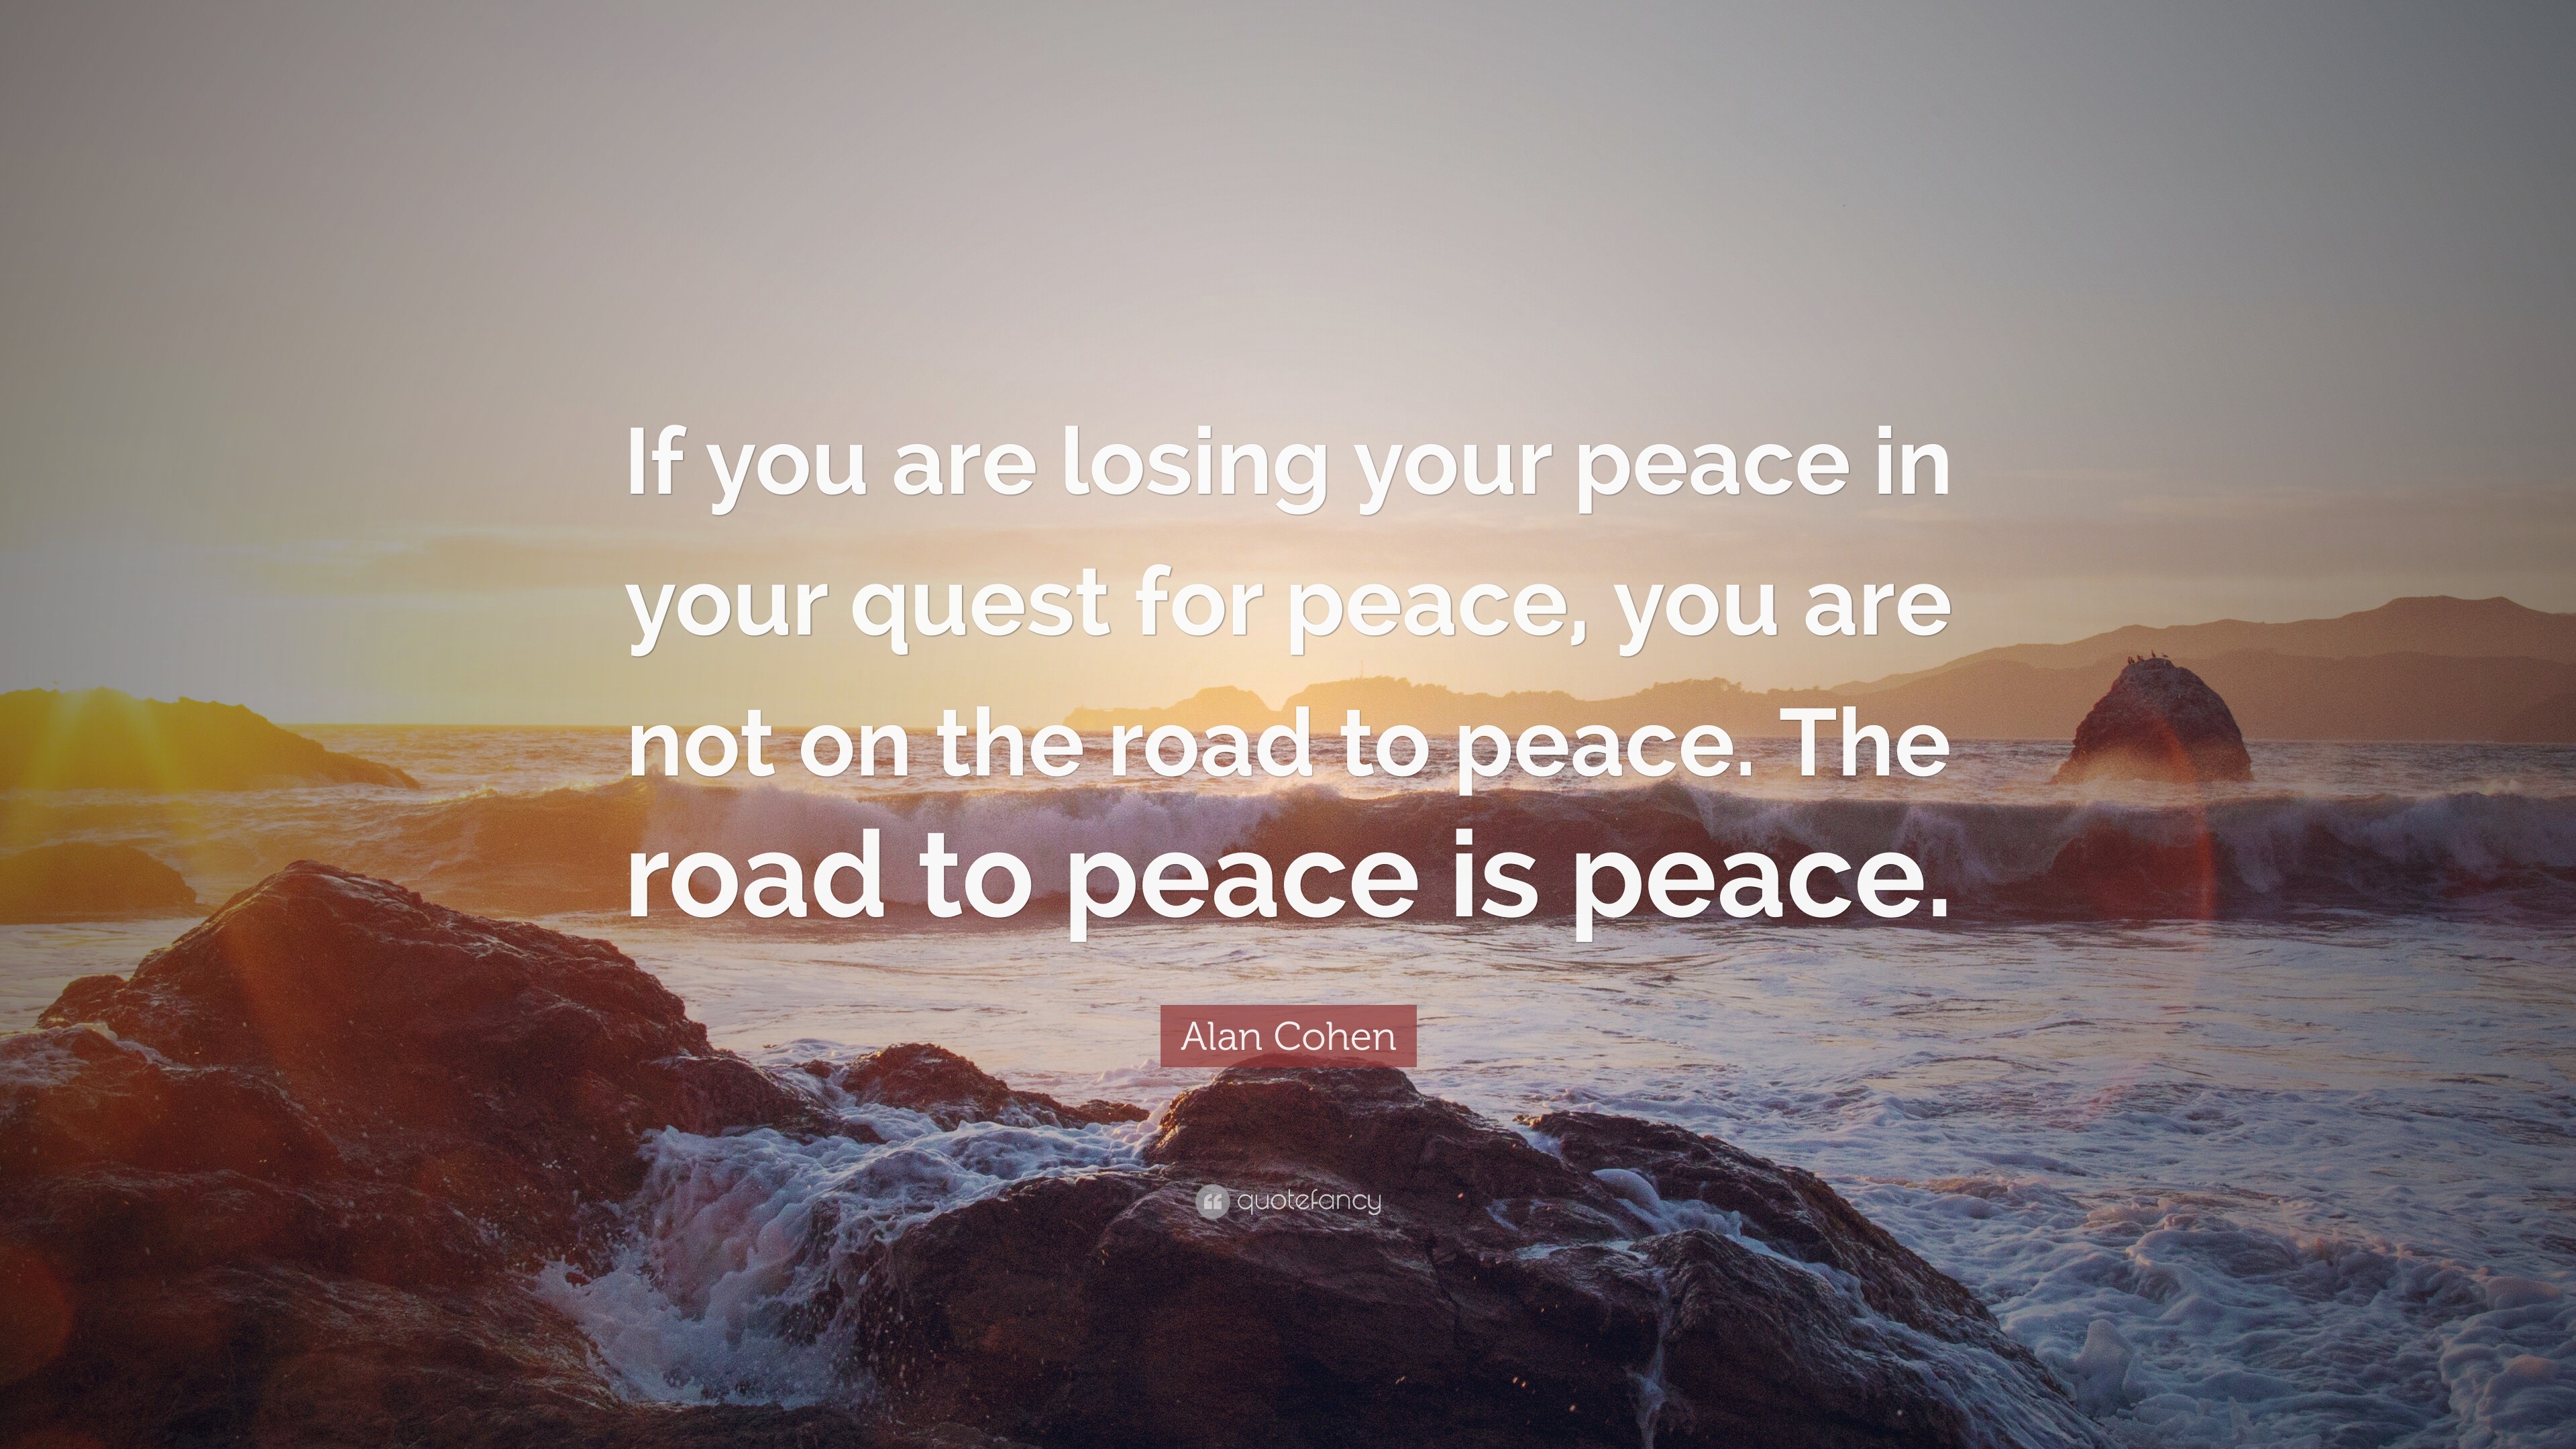 Alan Cohen Quote: “If you are losing your peace in your quest for peace ...